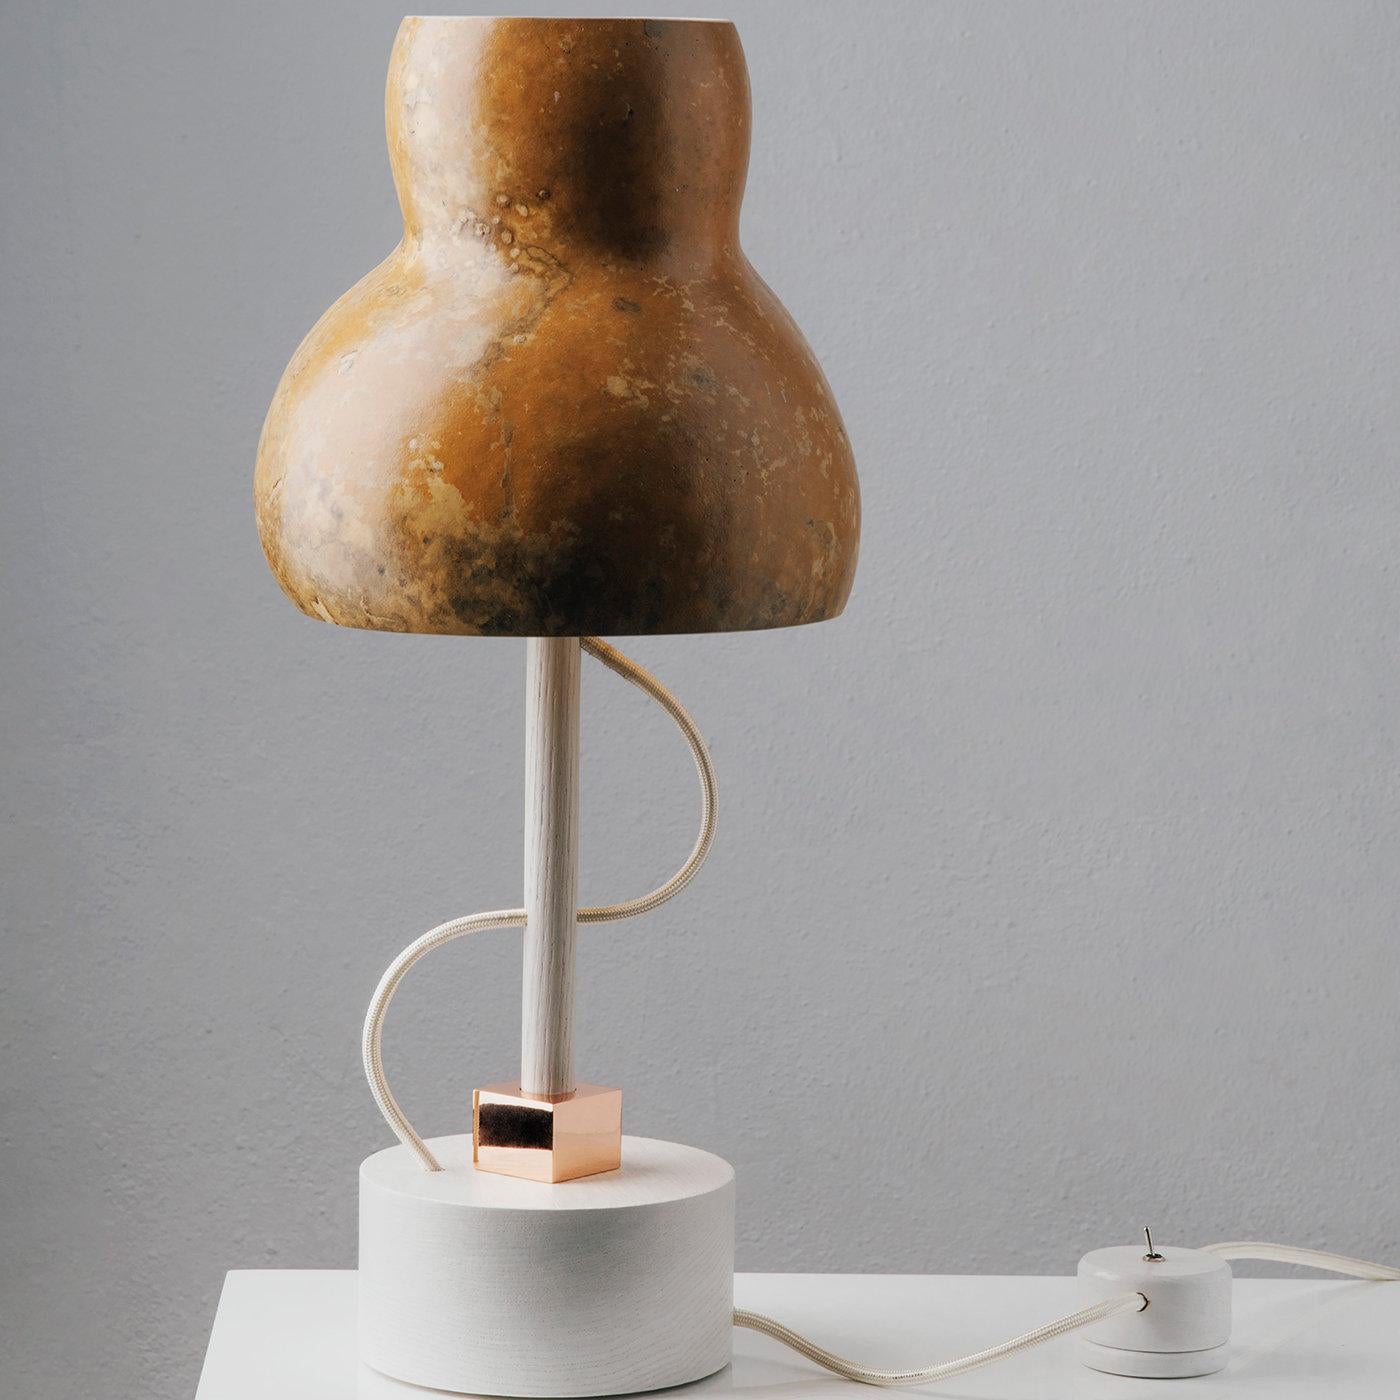 The desk lamp takes shapes from the animal and plant world. The lampshade in Lagenaria dried gourd, with its unique veining, together with the rounded ash wood base, brings to mind a typical inhabitant of the undergrowth. The colored fabric cable,